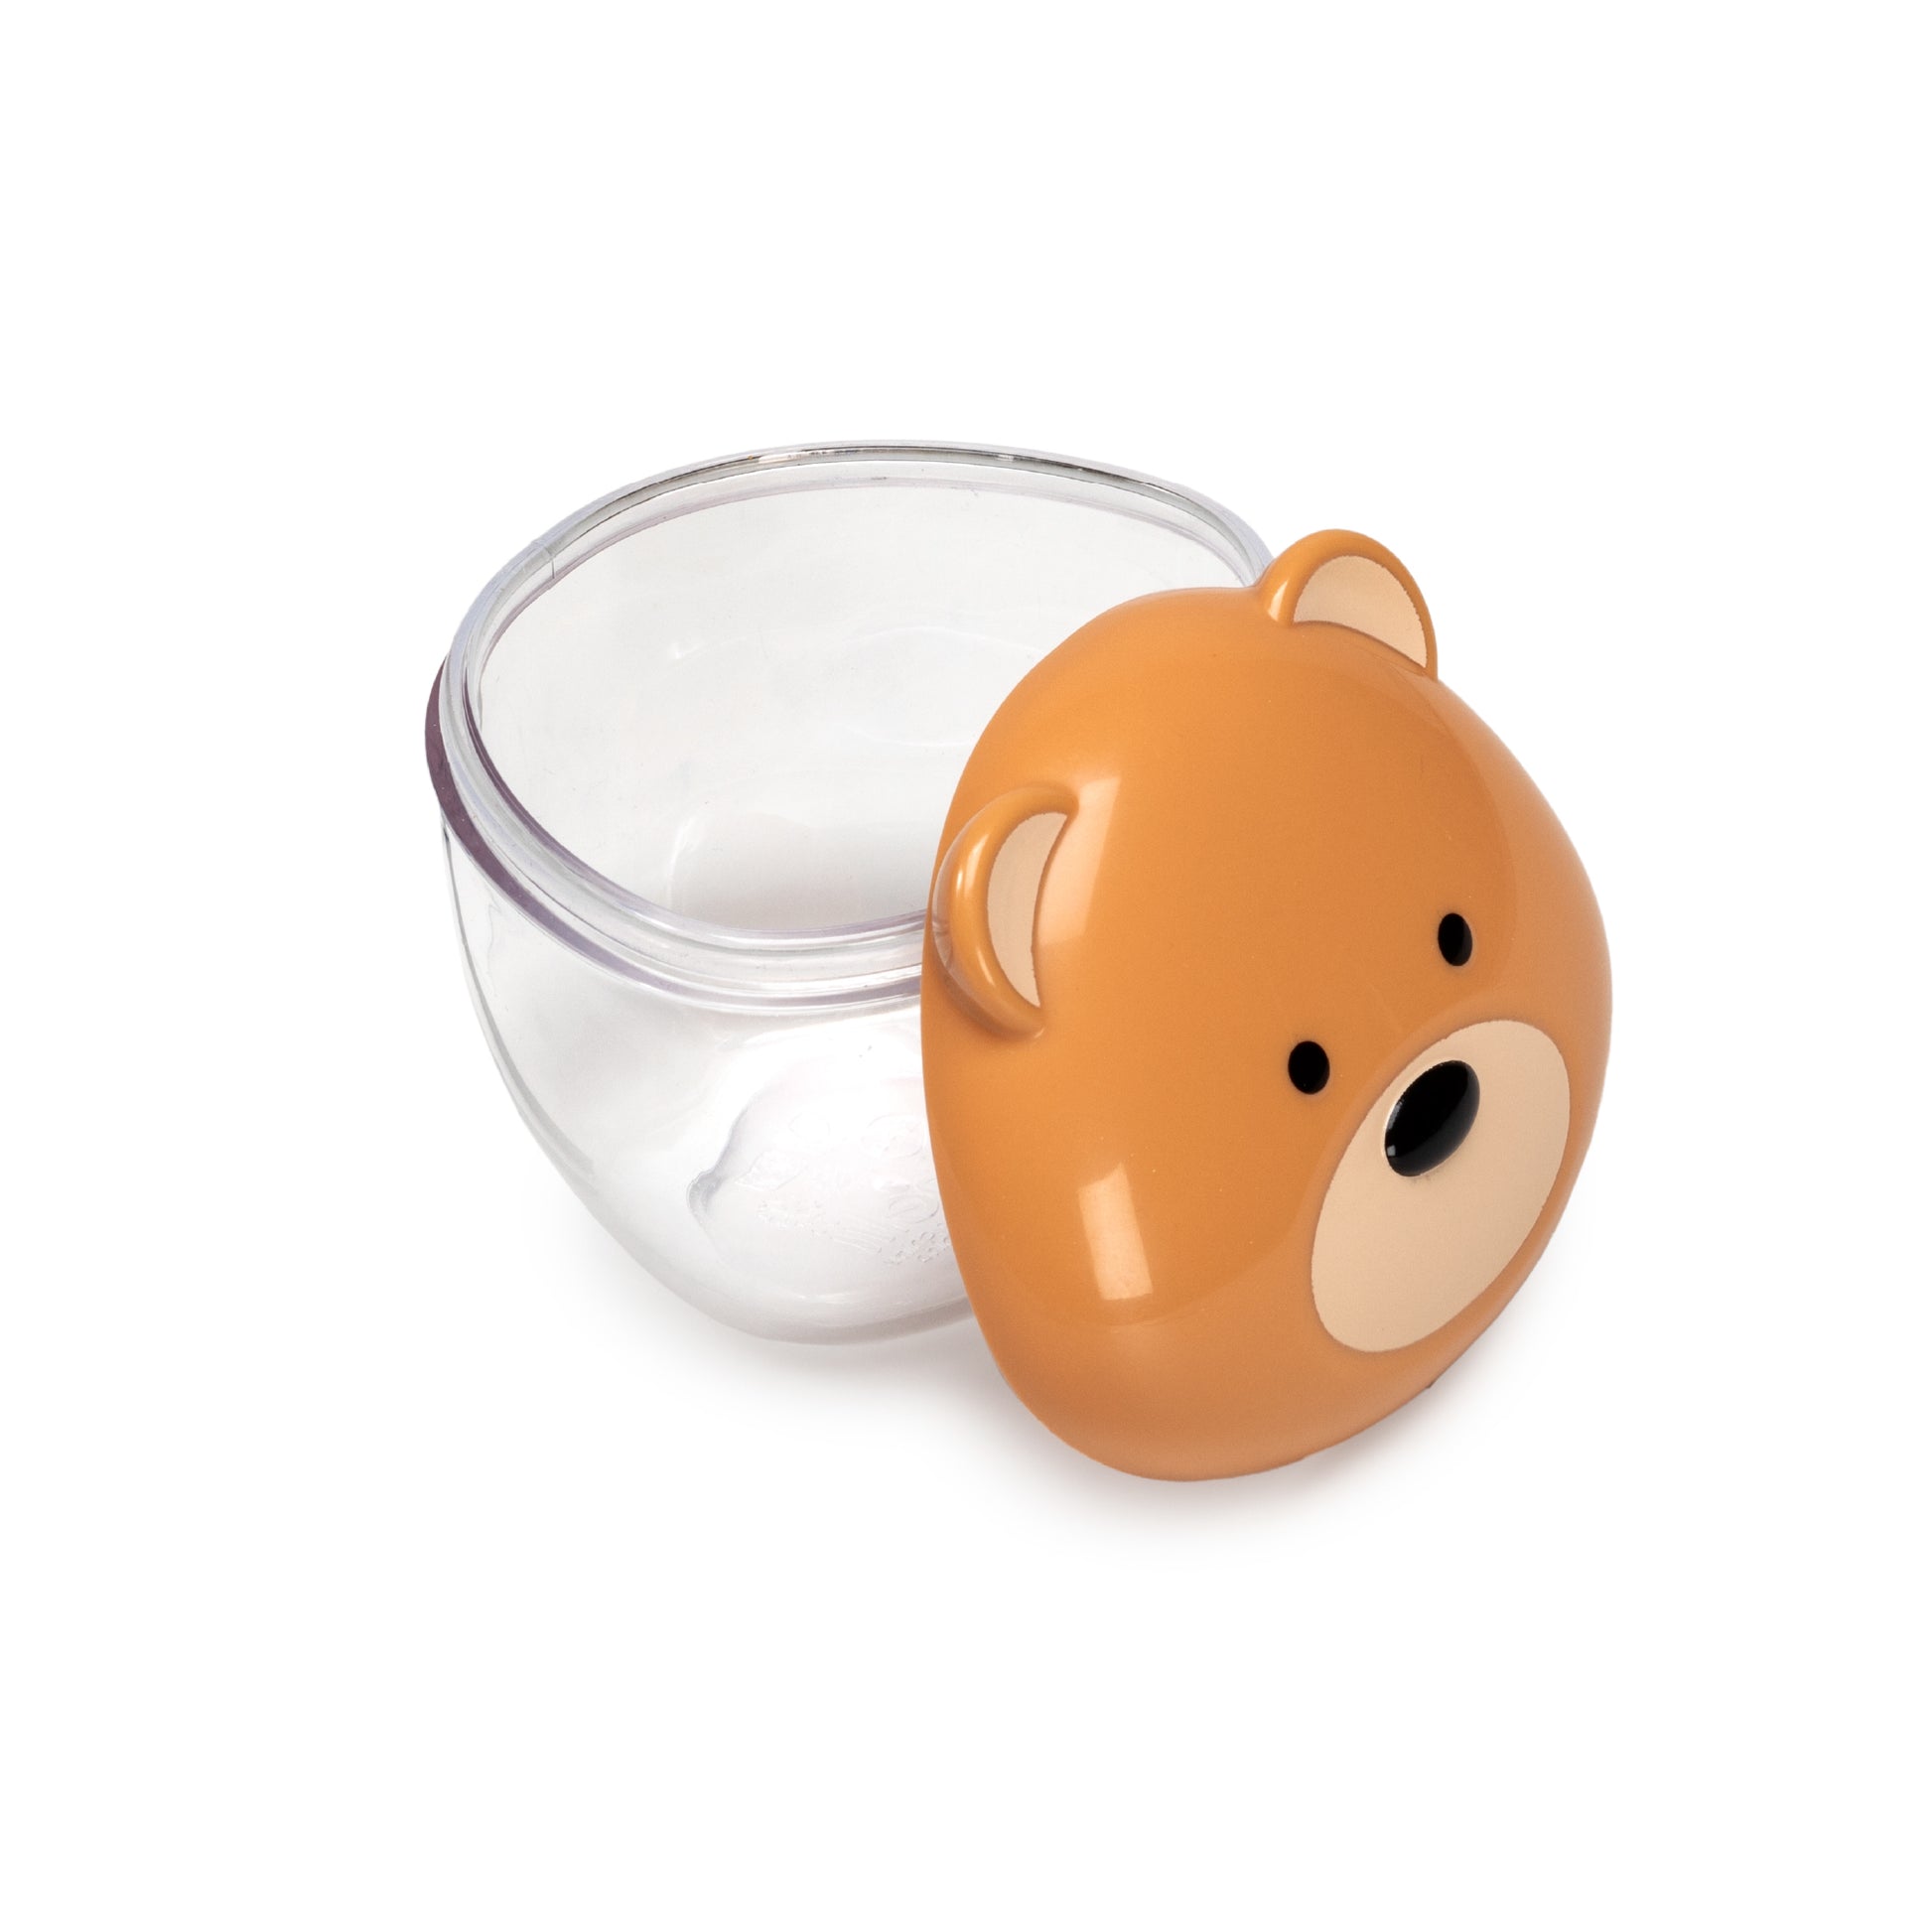 Melii Bear Snack Containers - Adorable, Airtight, and Leakproof Designs for Kids - BPA Free, Easy Clean, Perfect for On the Go Snacking and Lunch Boxes